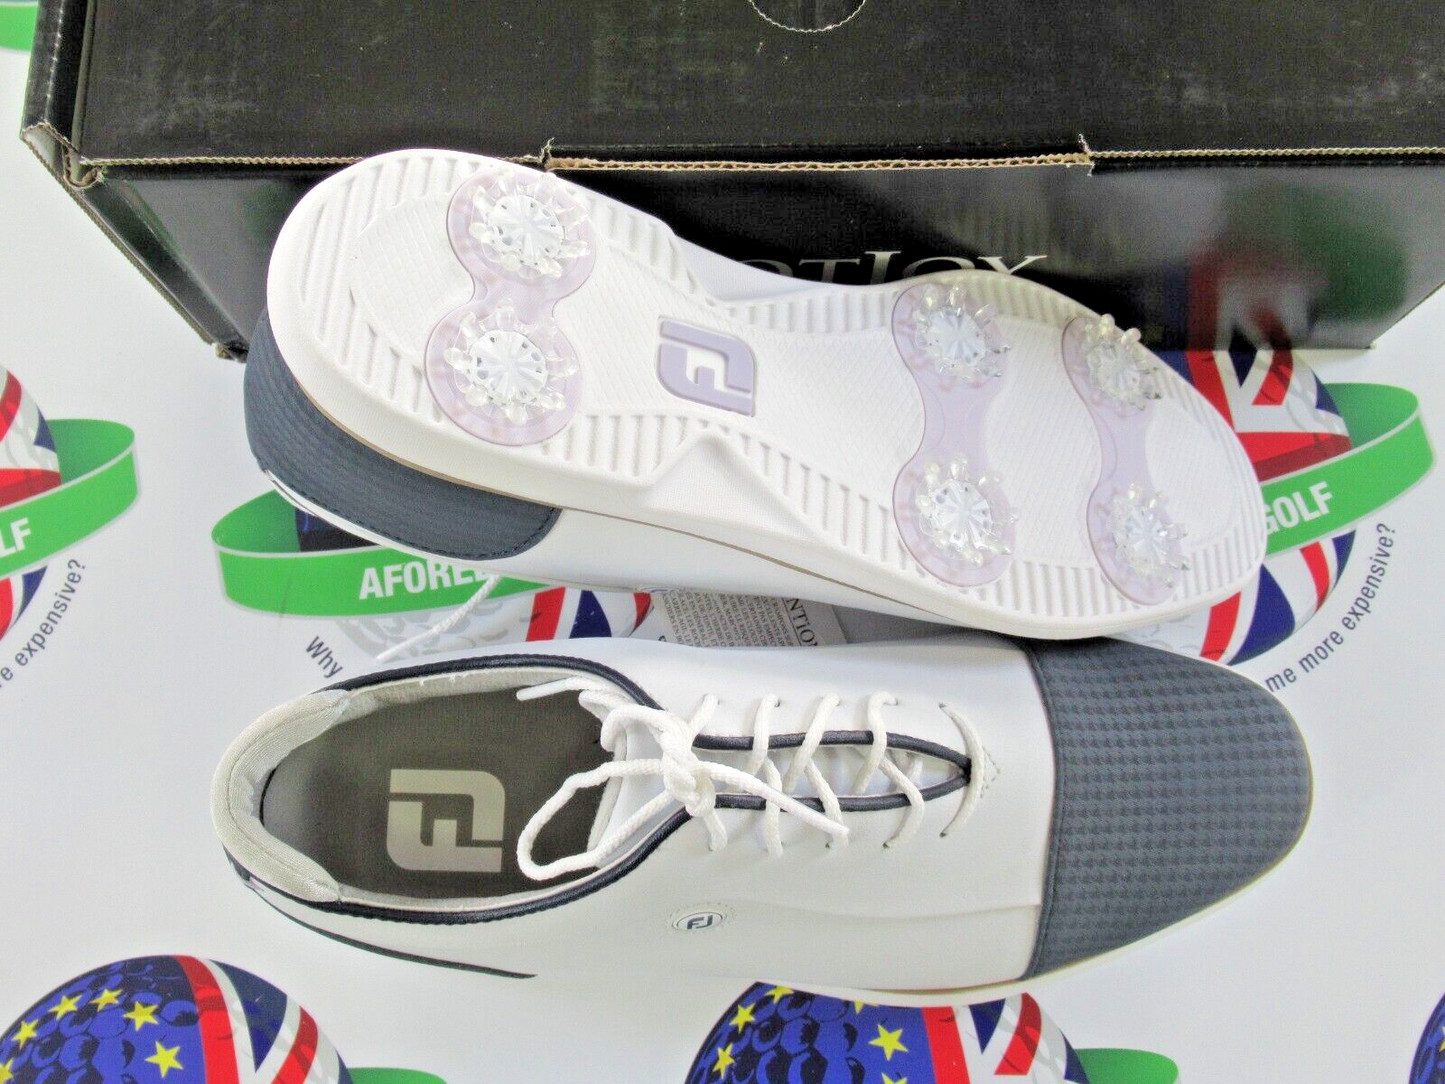 footjoy fj traditions womens golf shoes 97915k white/navy size 6 wide/large